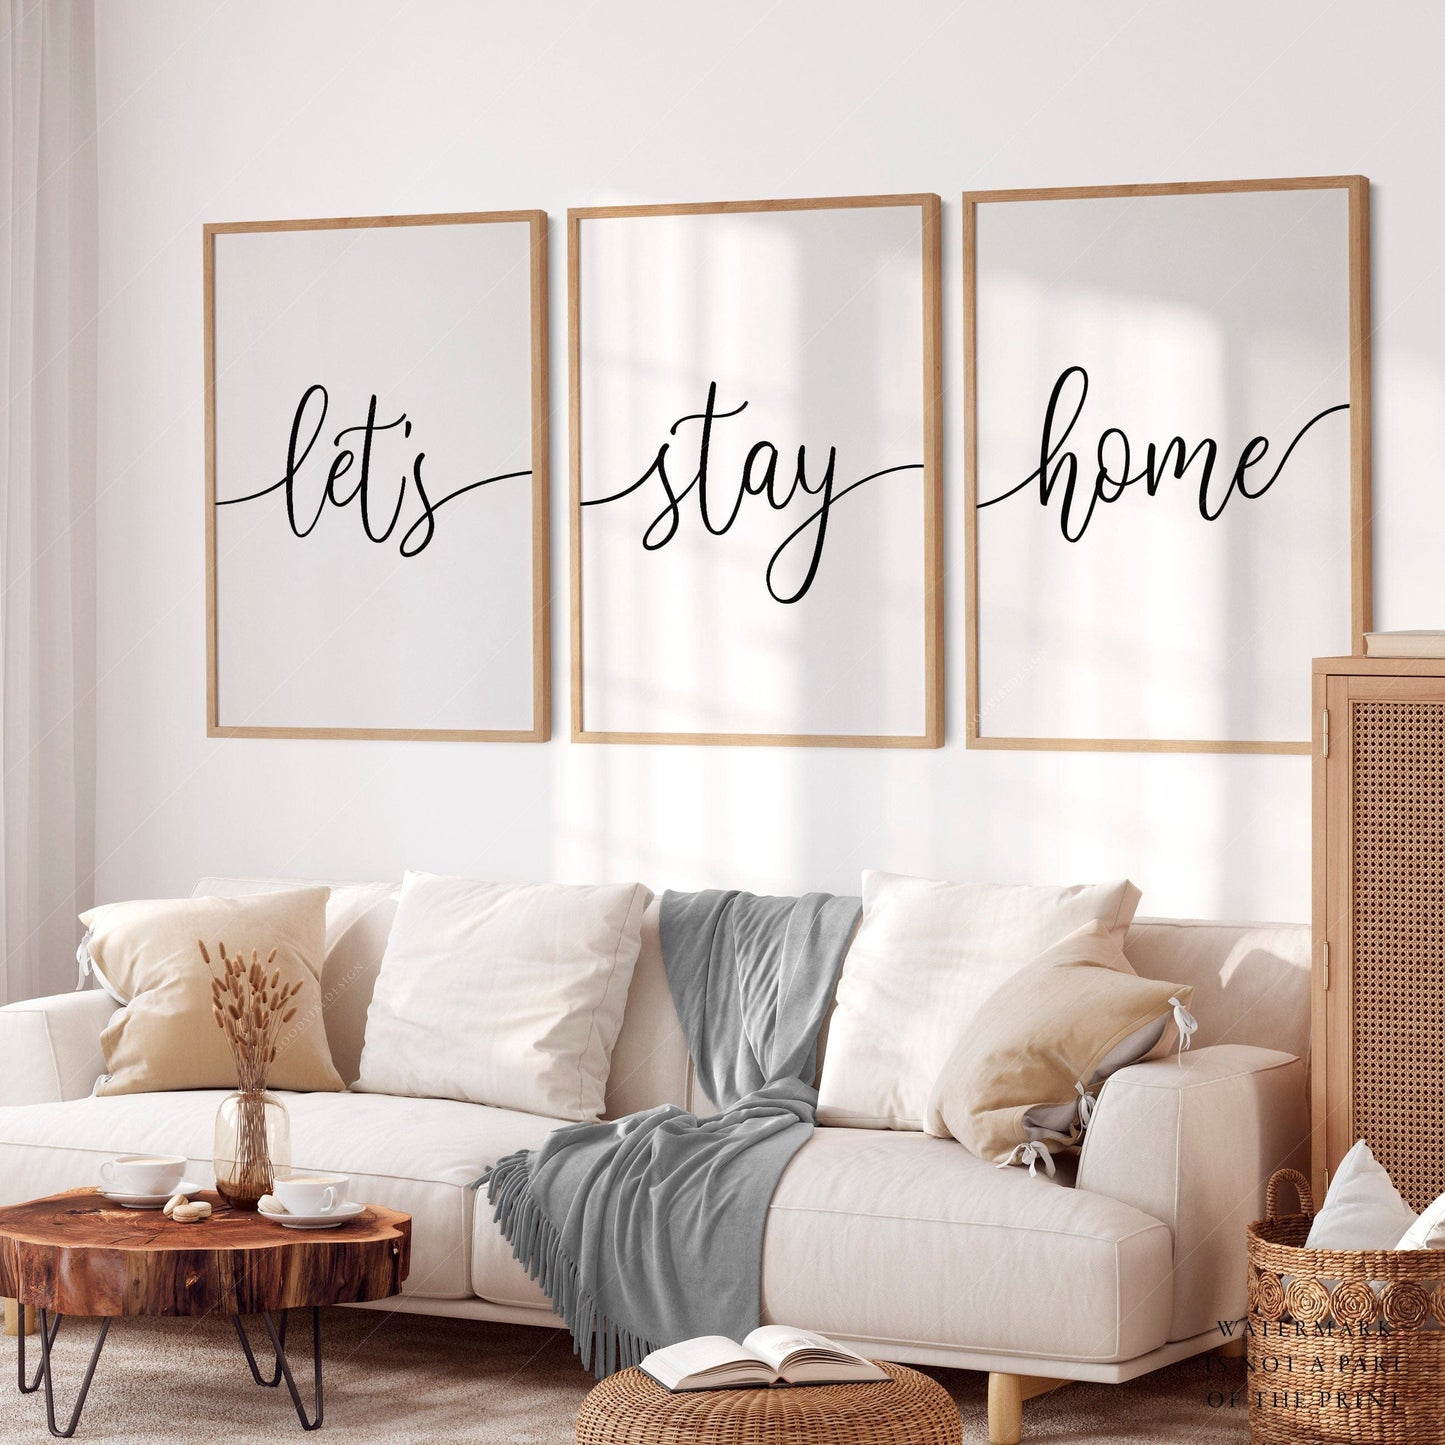 Home Poster Decor Set of 3 Let's stay home is all that we need now! This beautiful set of 3 handwriting prints is perfect to cozy up your home decor. Click for details